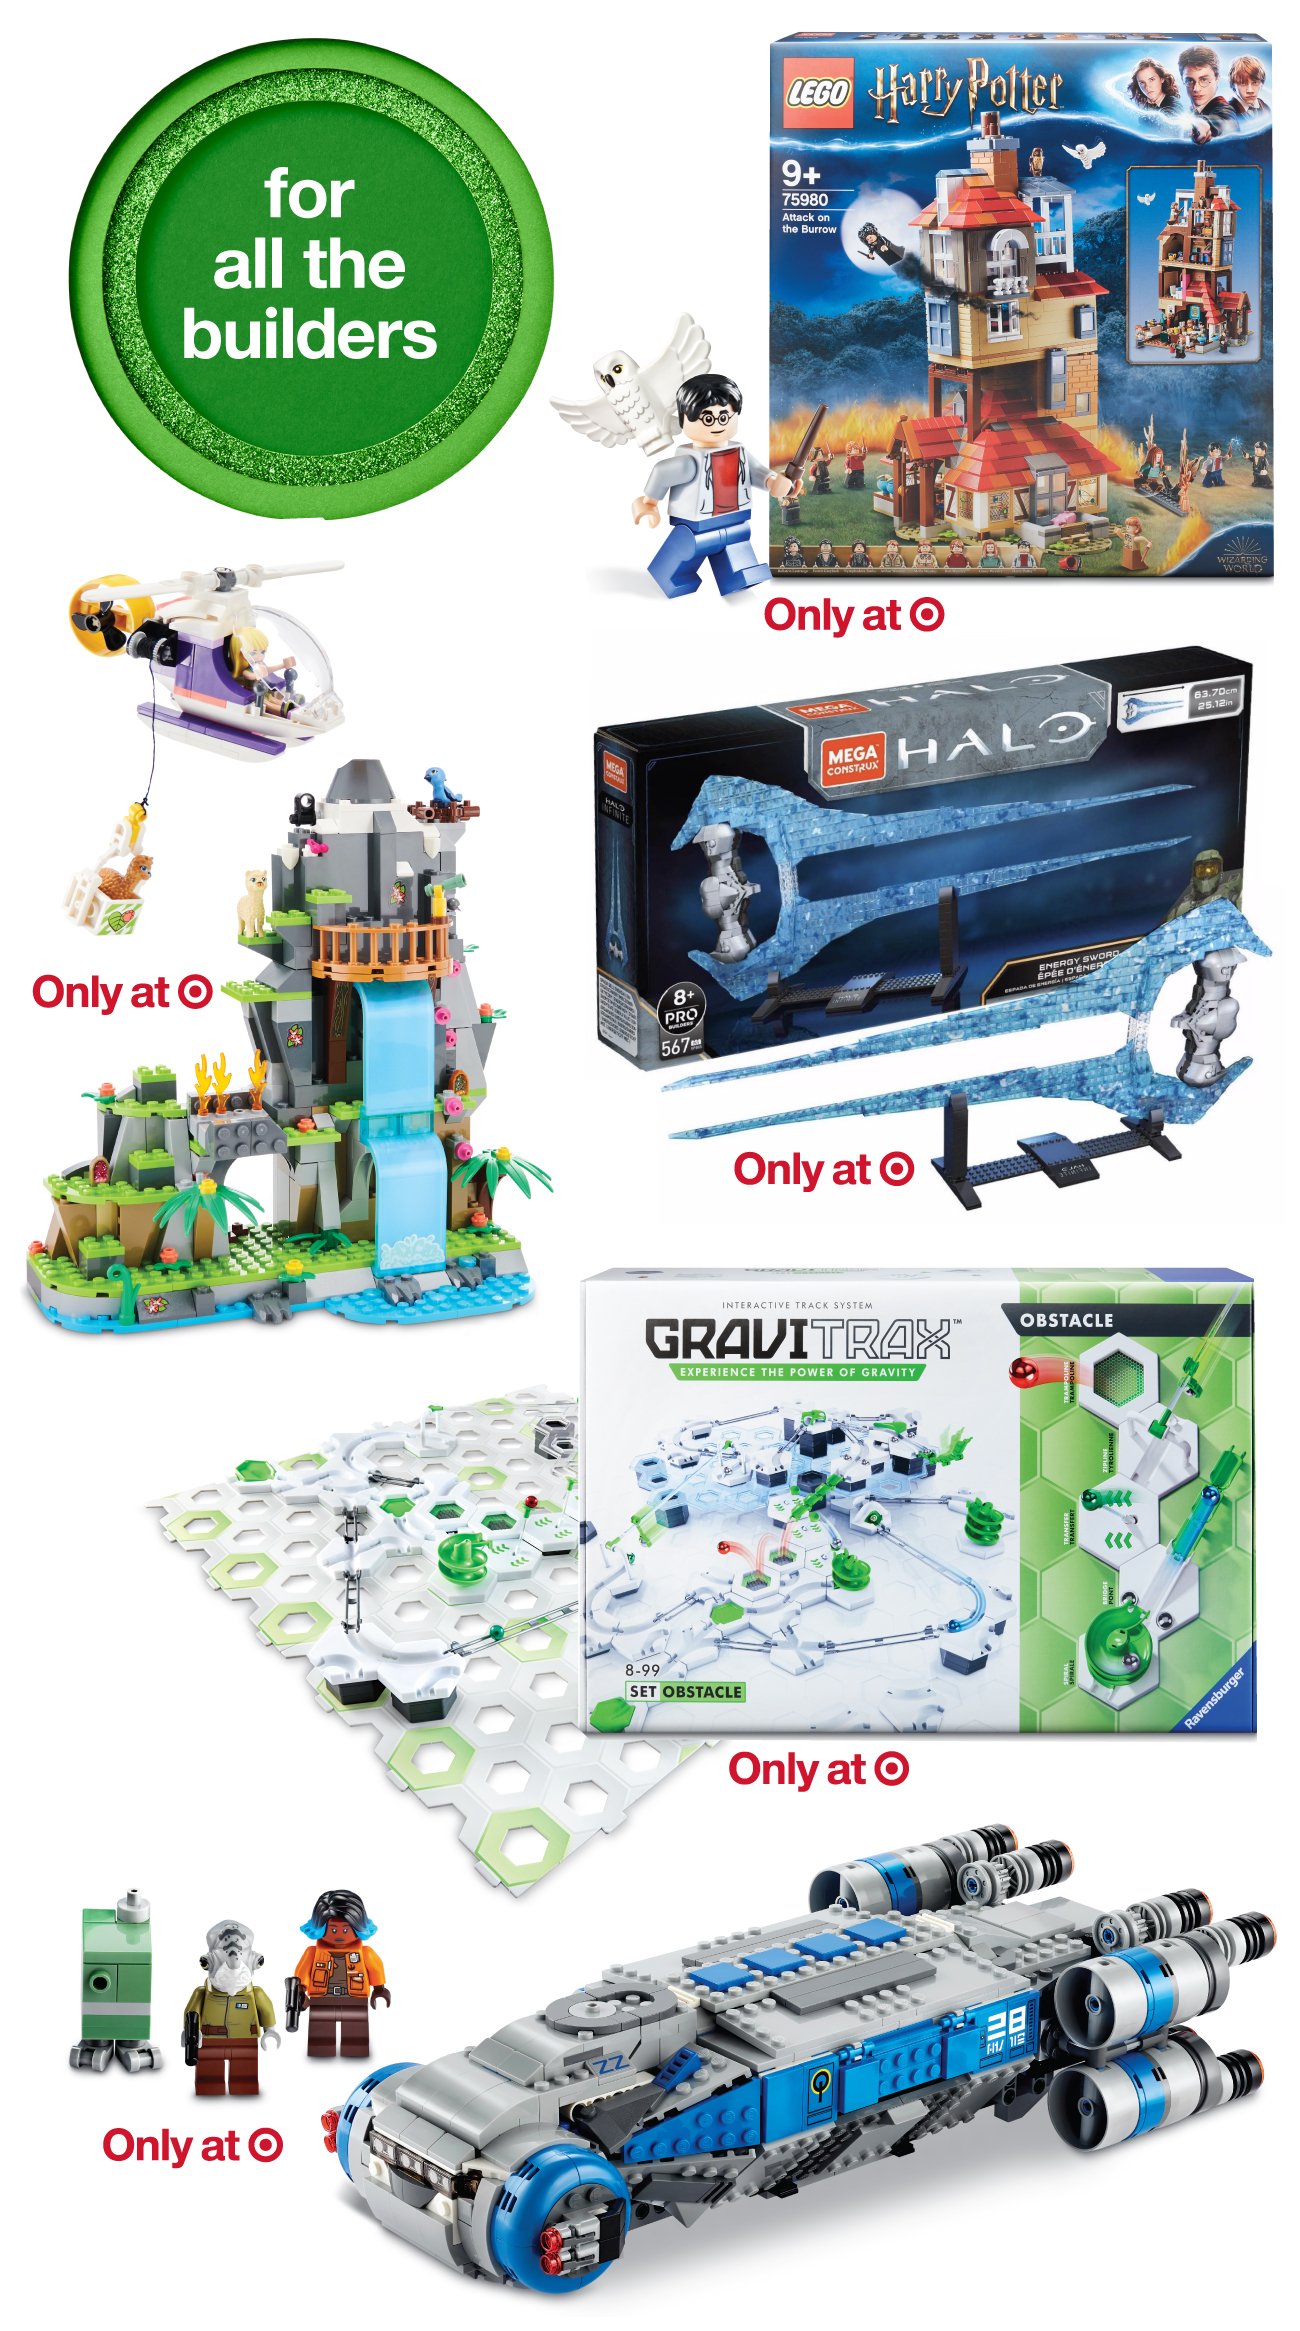 A collage of top toys and games for builders